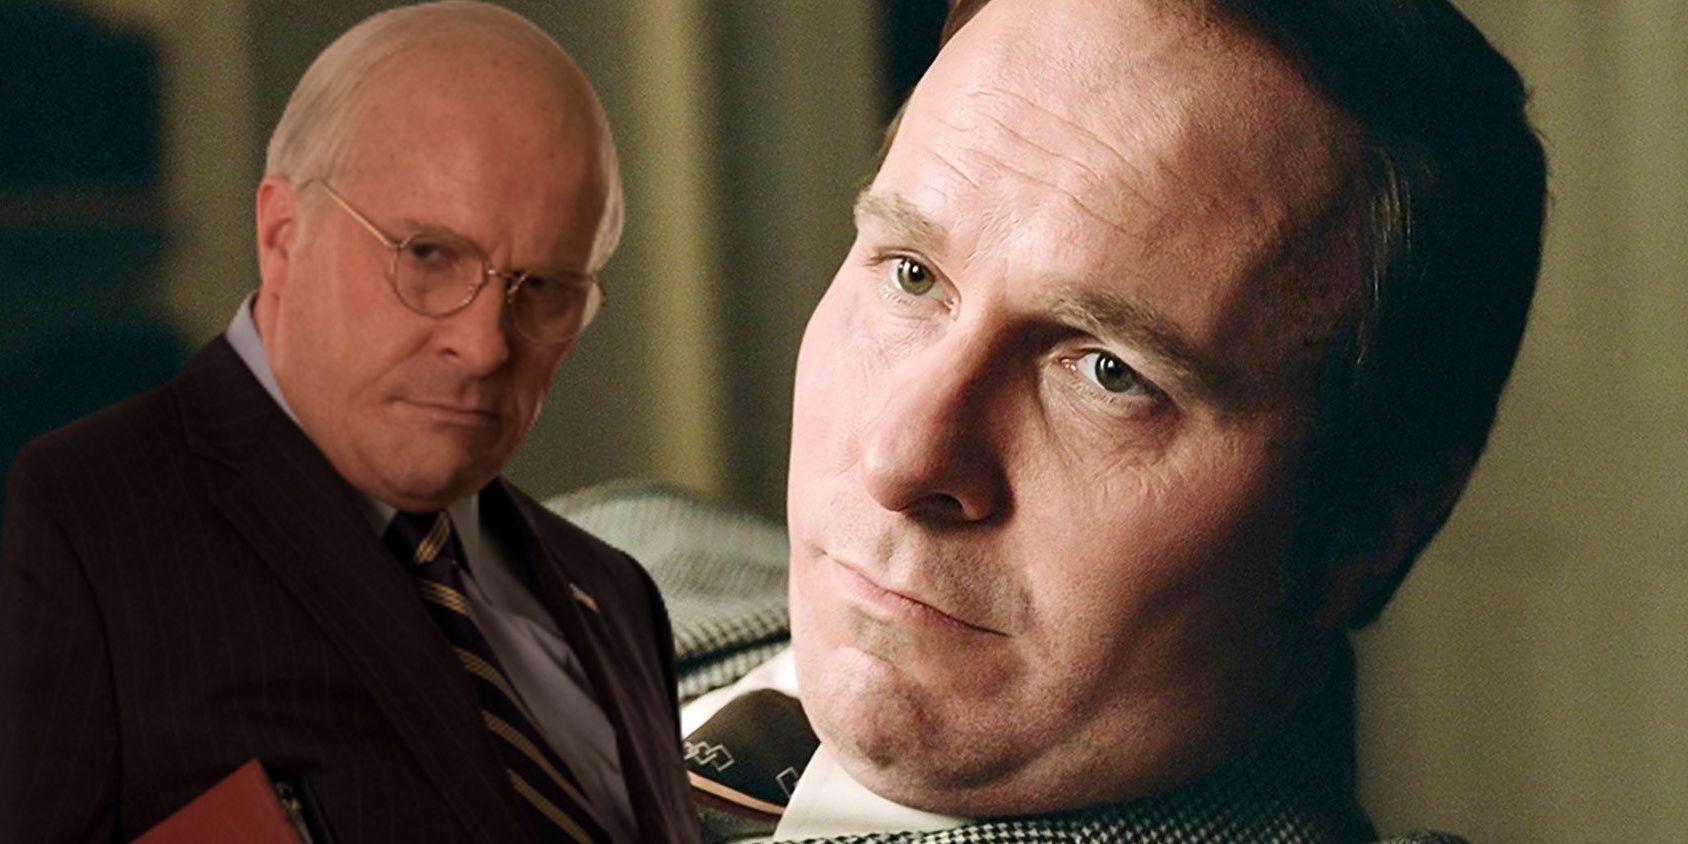 Christian Bale pictured as Dick Cheney in Vice